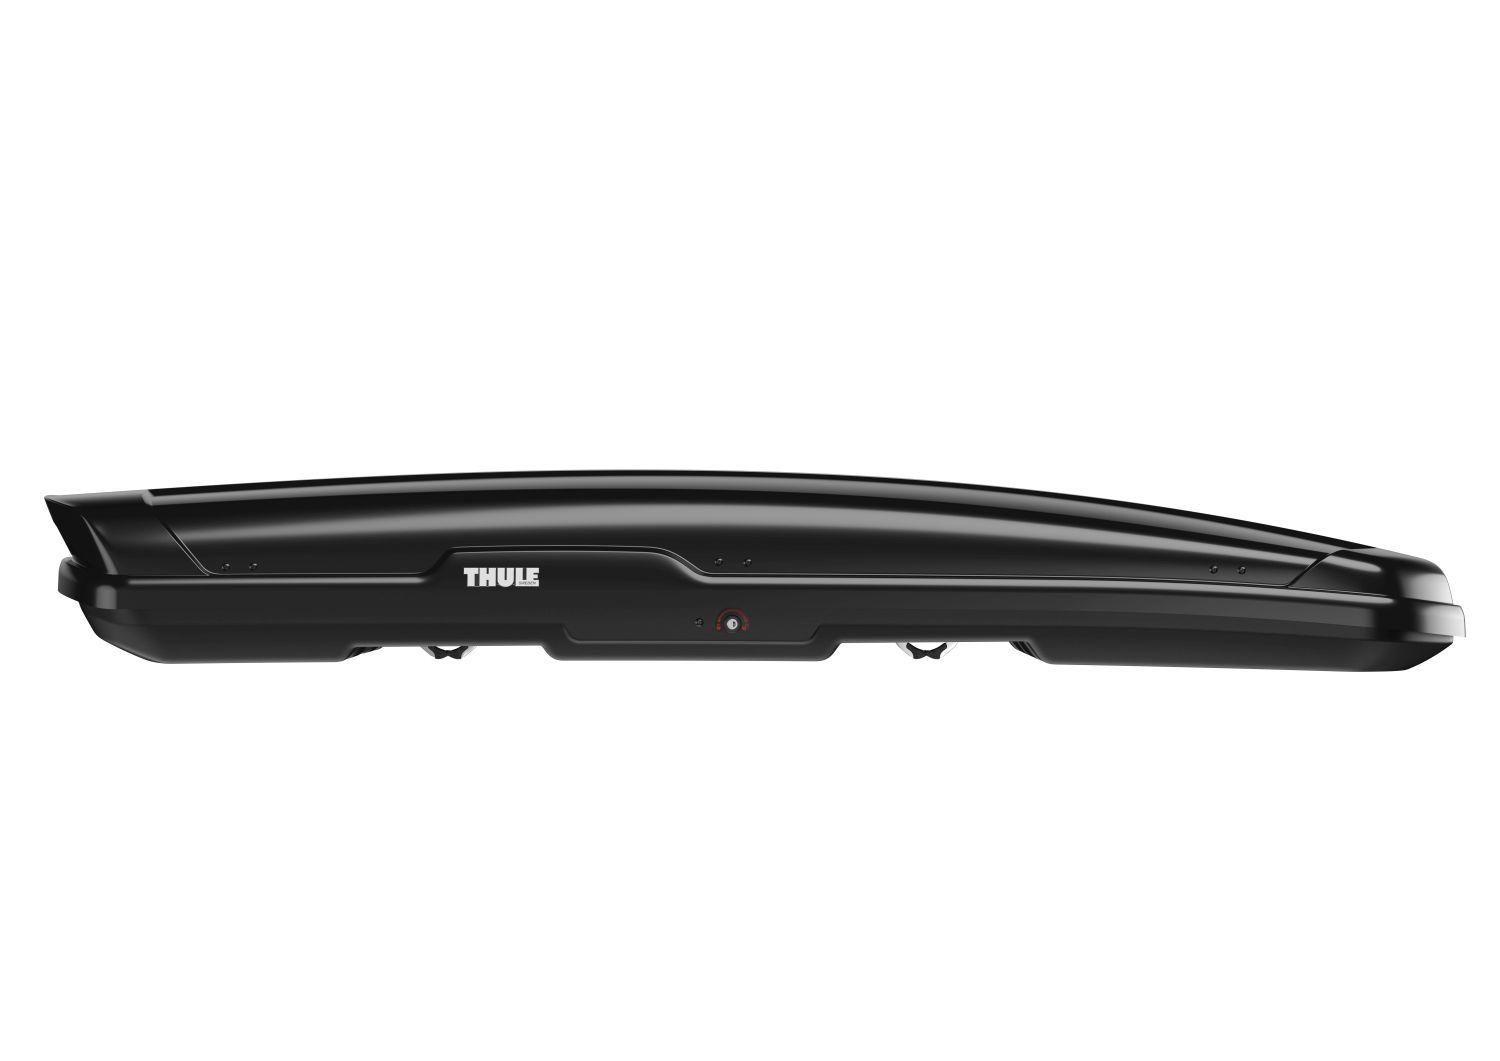 Thule presents Thule Flow - a roof-mounted ski rack for winter sports fans – image 3